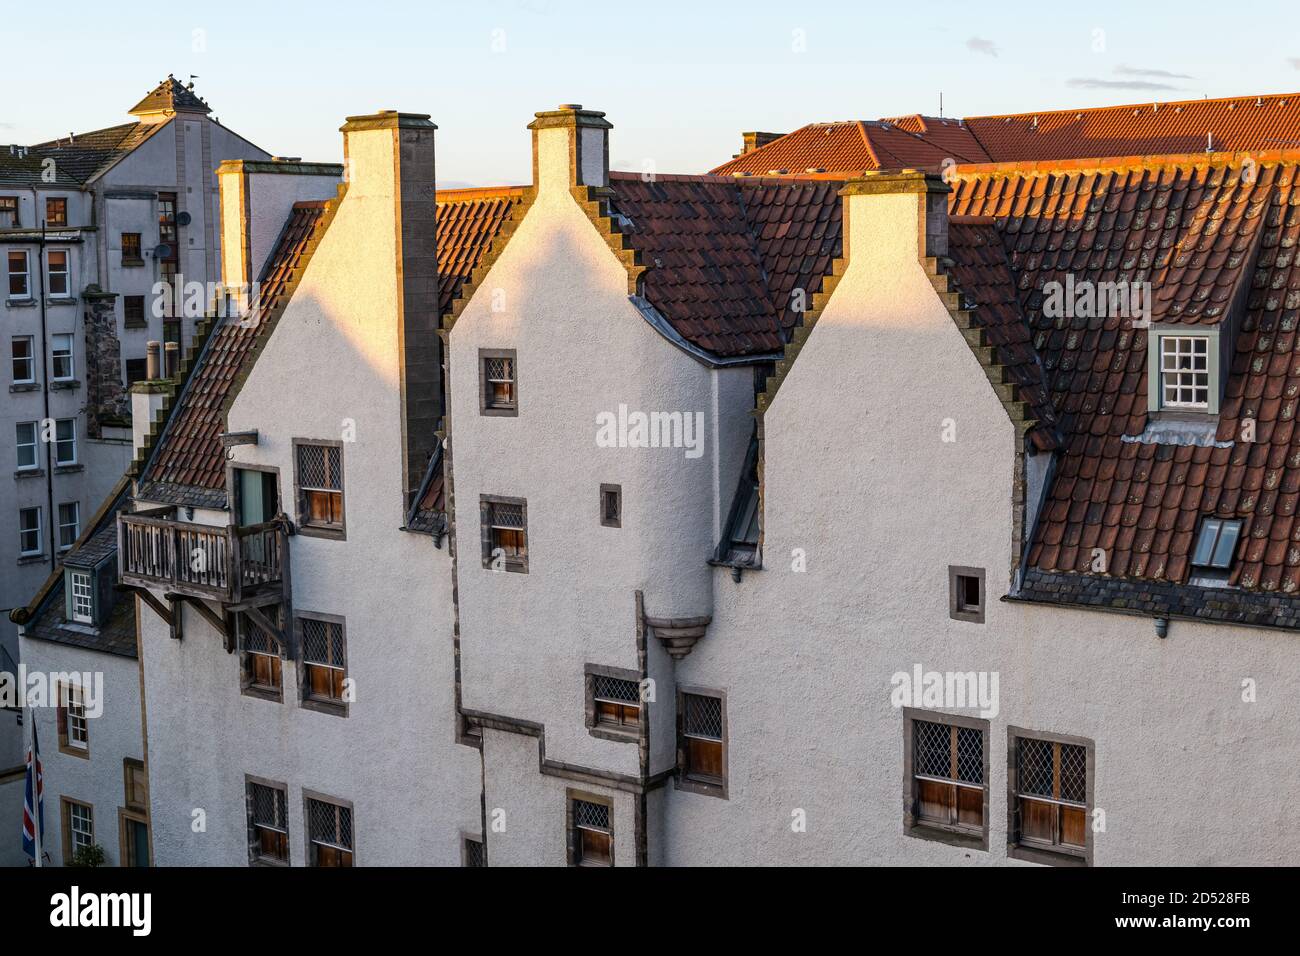 Leith, Edinburgh, Scotland, United Kingdom, 12th October 2020. UK Weather: setting sun on Lamb's House, a historic 16th century Grade A-listed former Hanseatic merchant's house, one of the oldest buildings in Leith, restored by architect Nicholas Groves Raines with a crow stepped gable roofline Stock Photo